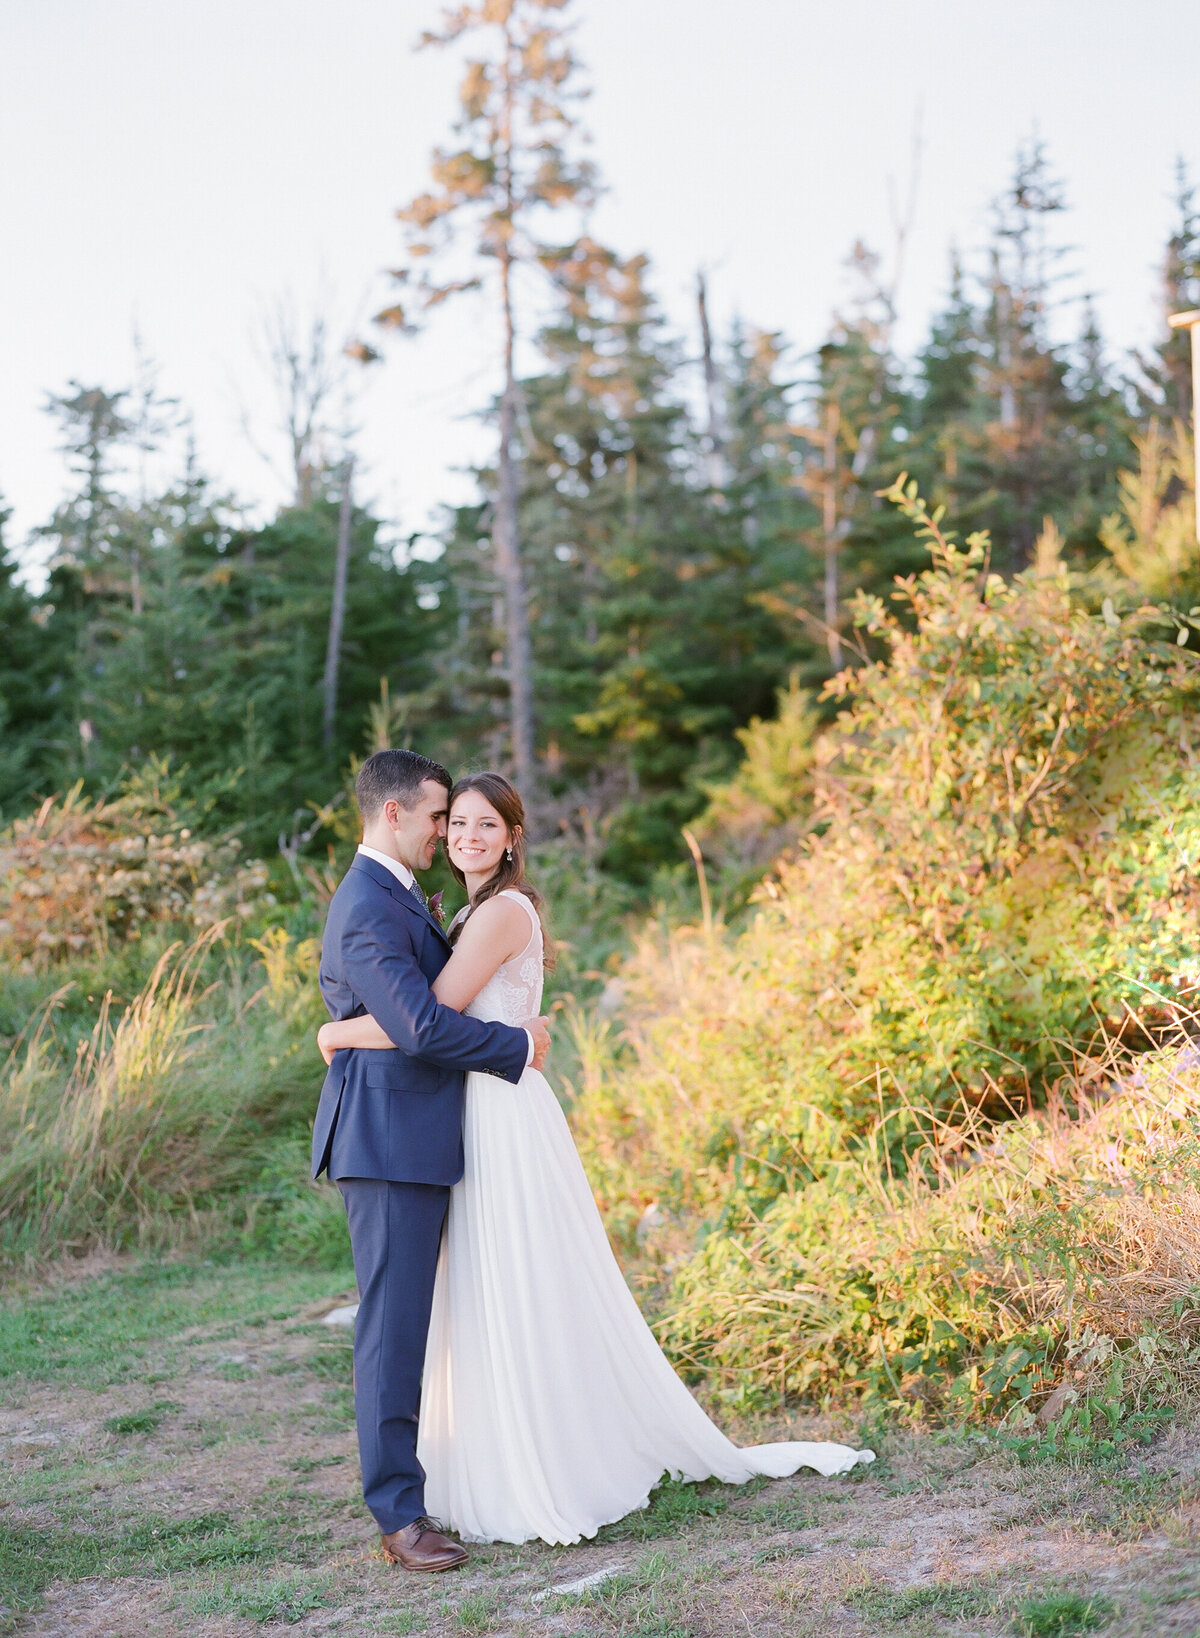 Jacqueline Anne Photography - Halifax Wedding Photographer - Jaclyn and Morgan-76